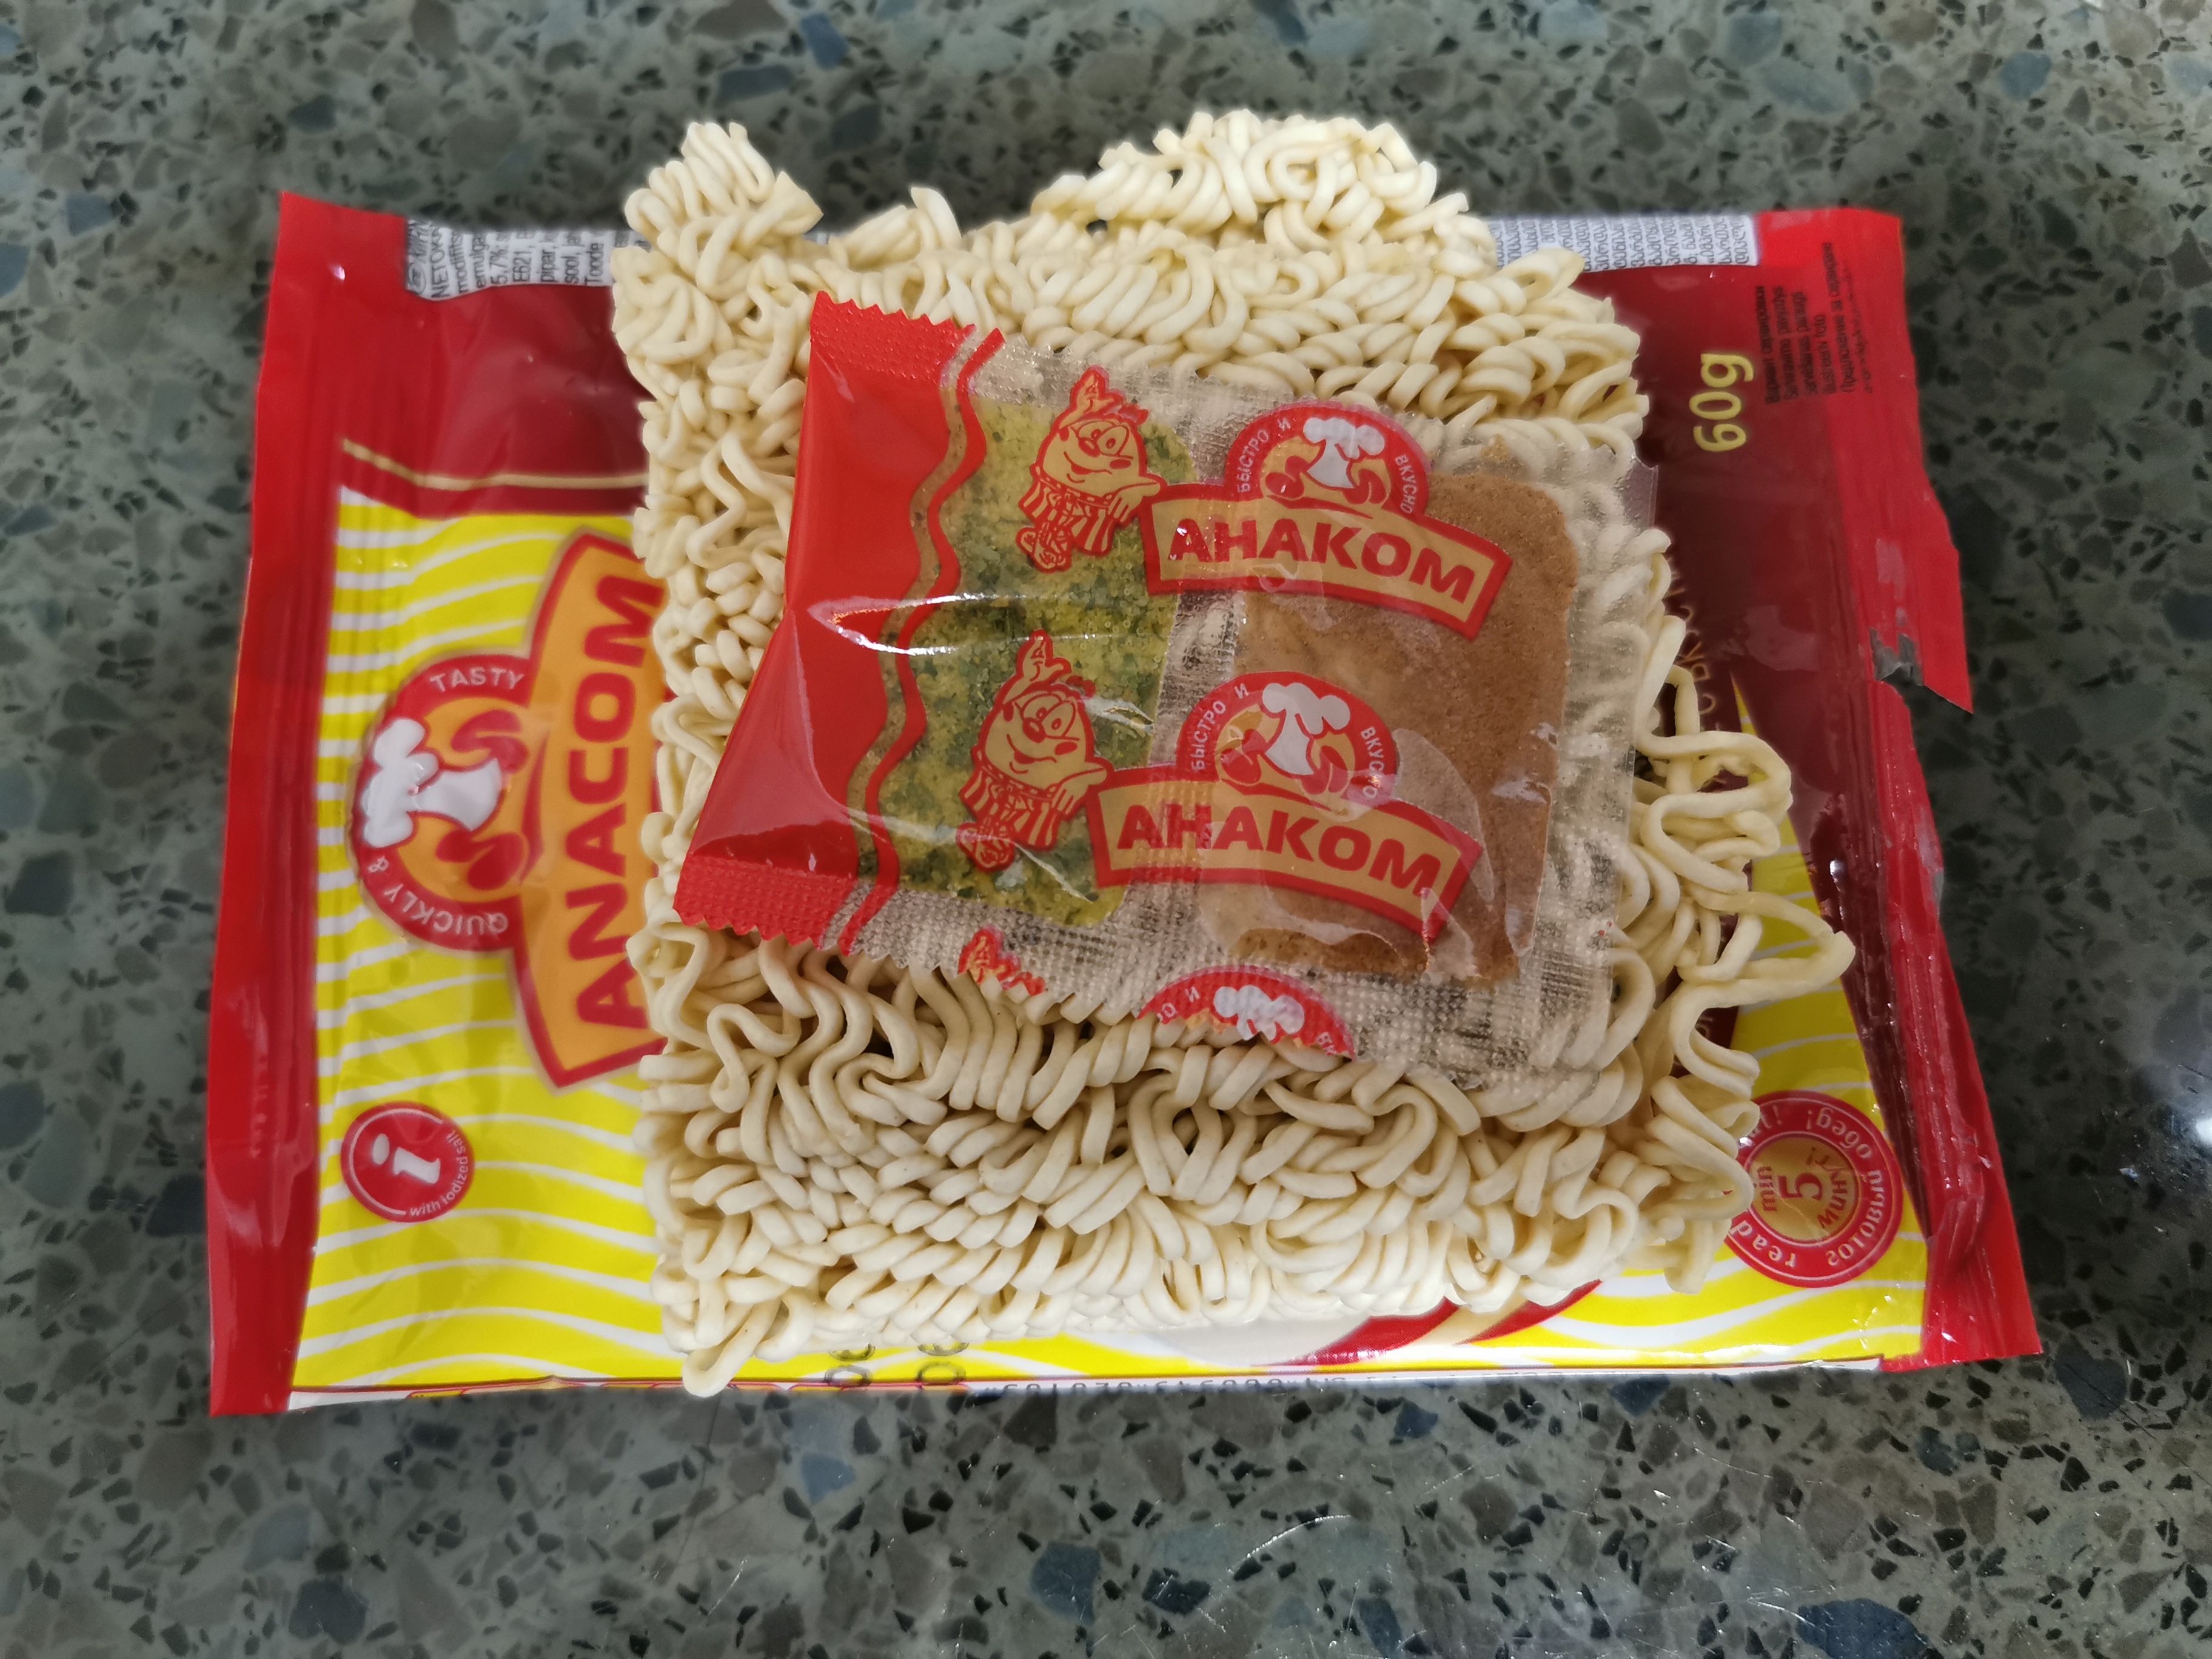 #2302: Anacom "Instant Noodles with Spicy Chicken Flavour"